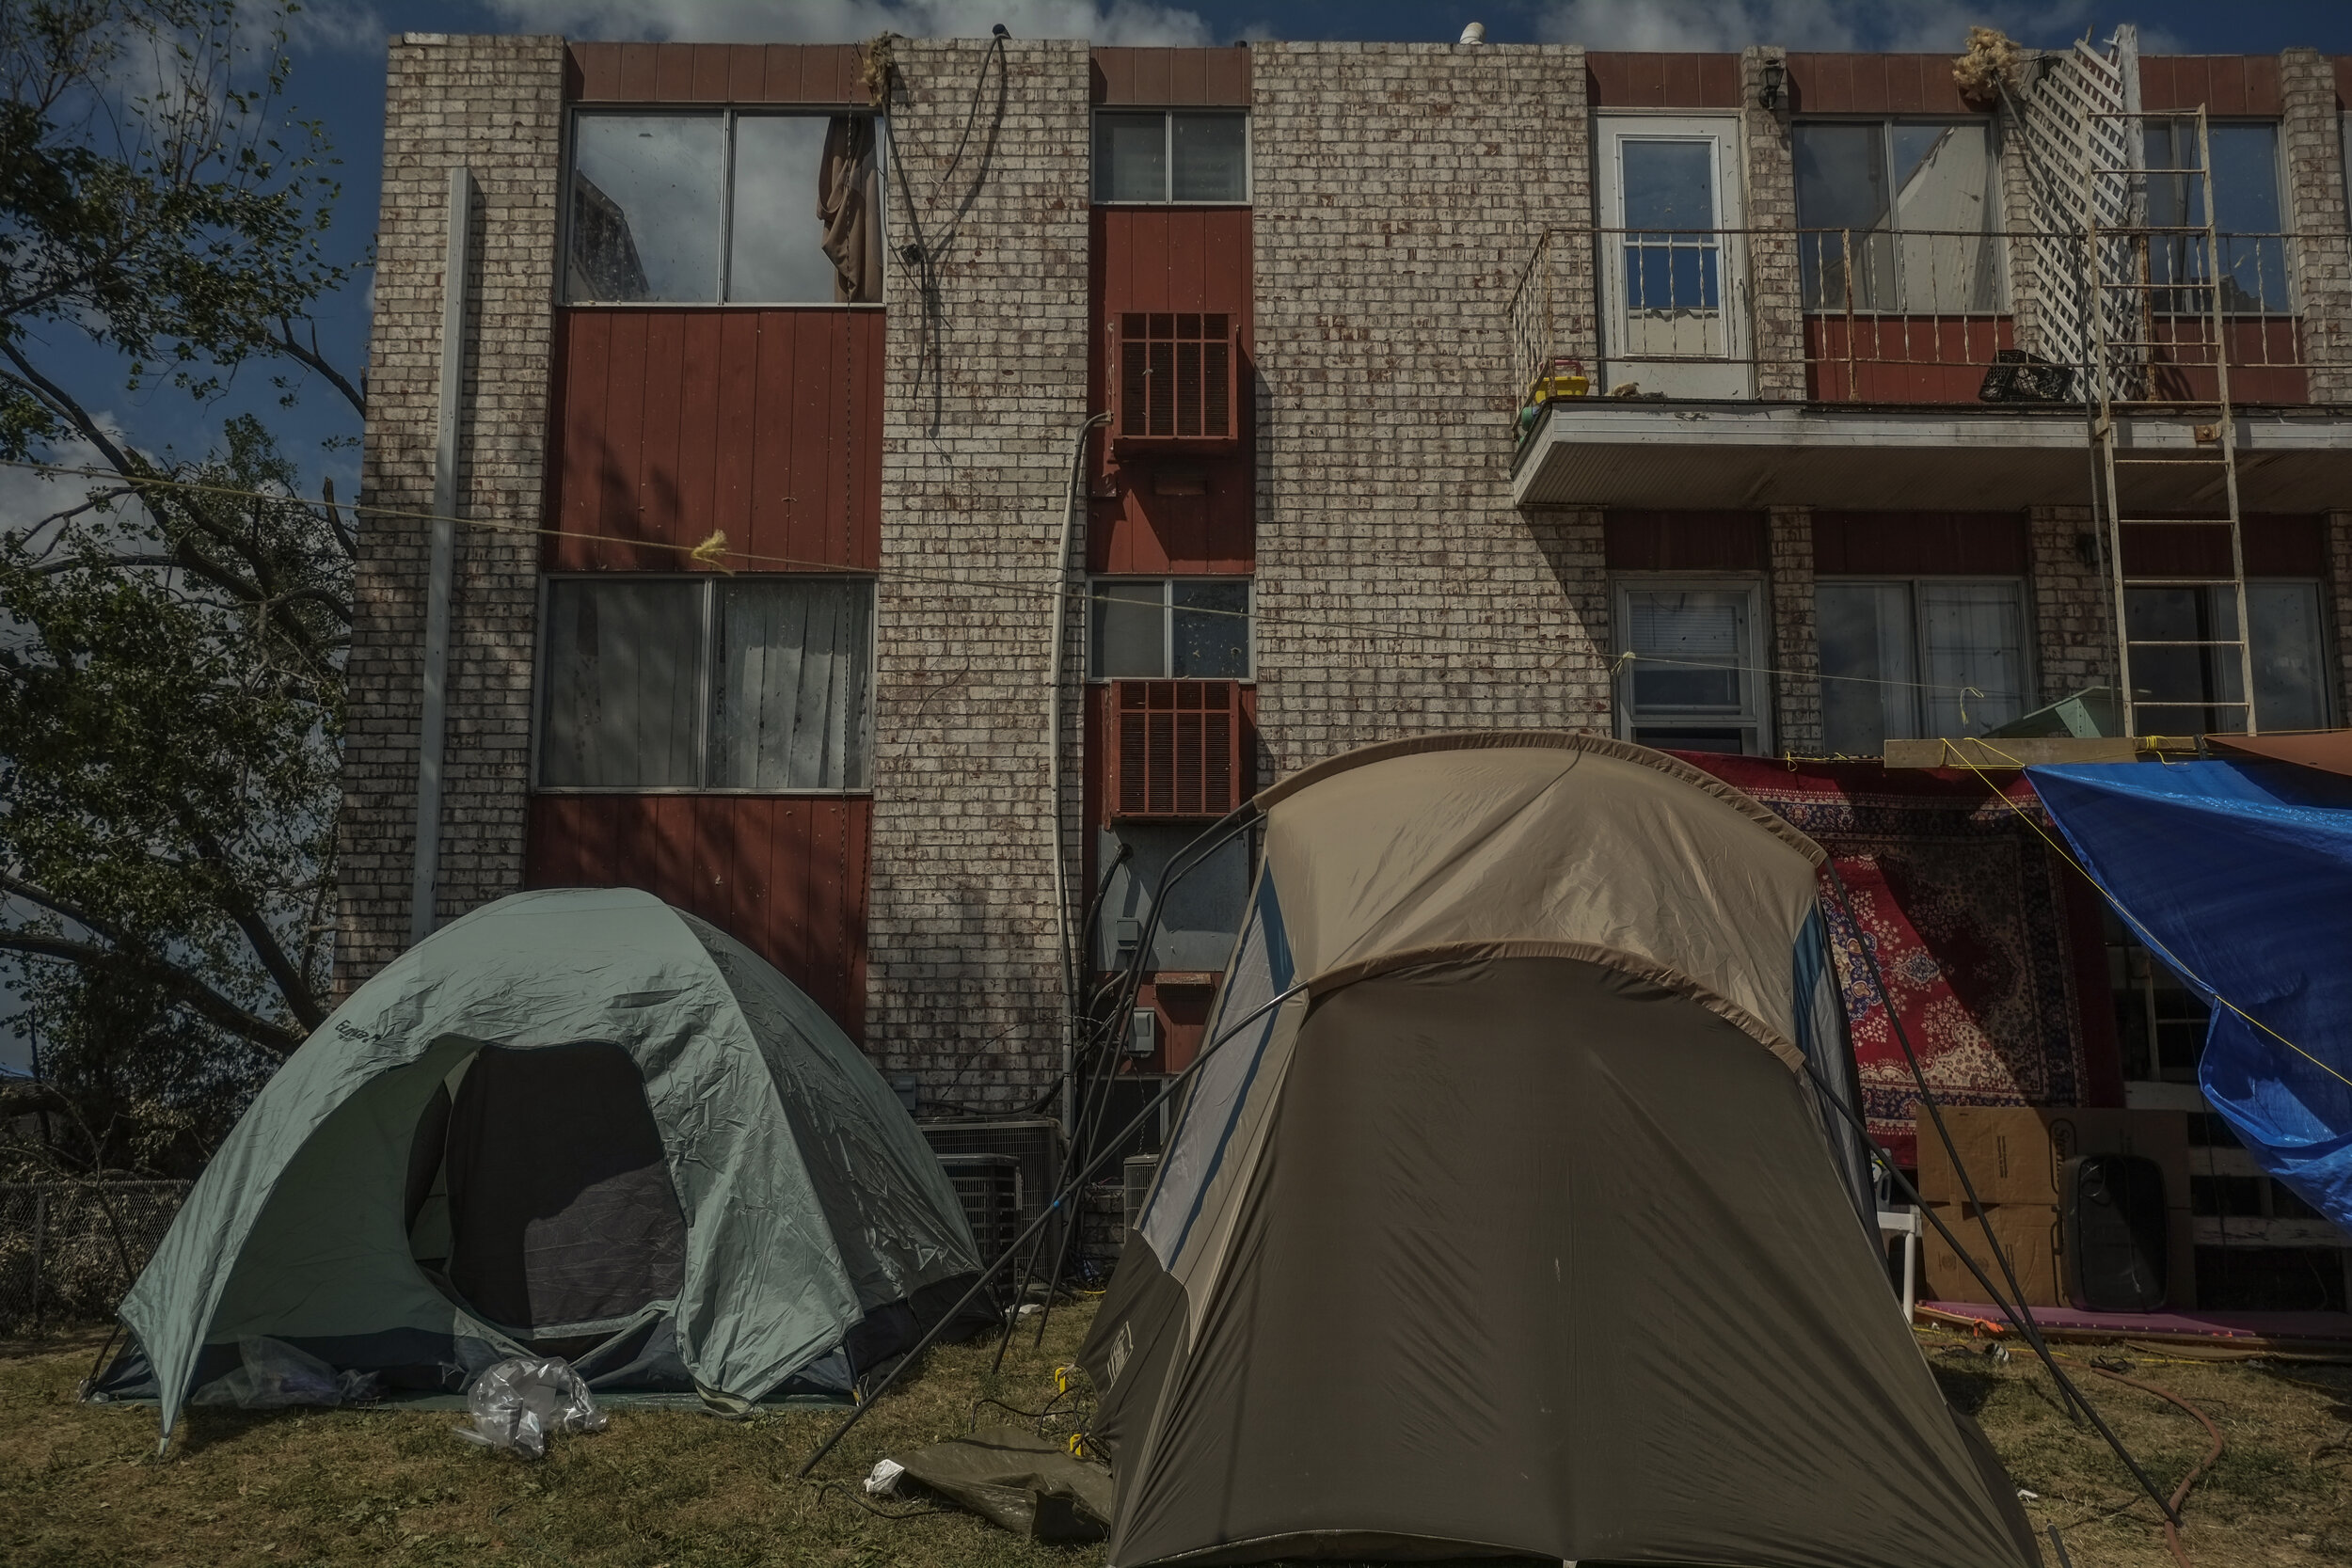  Tents serve as temporary housing for recently displaced families from Cedar Terrace apartments in southeast Cedar Rapids, Iowa on August 16th, 2020. With severe internal and external damage, this community became unlivable as housing infrastructure 